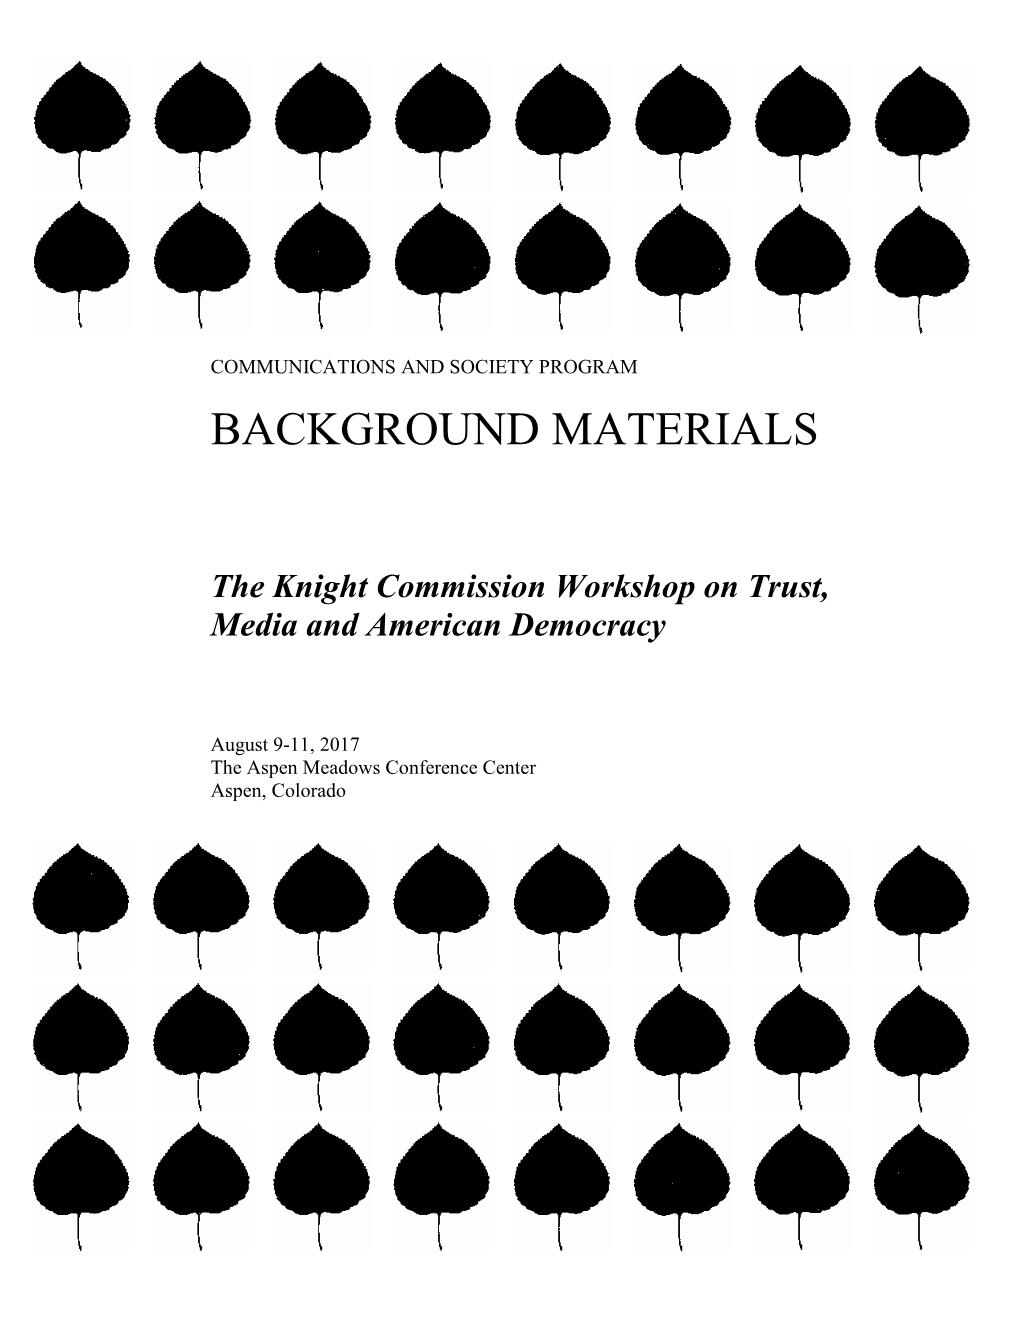 Download the Full Pdf Collection of Background Materials